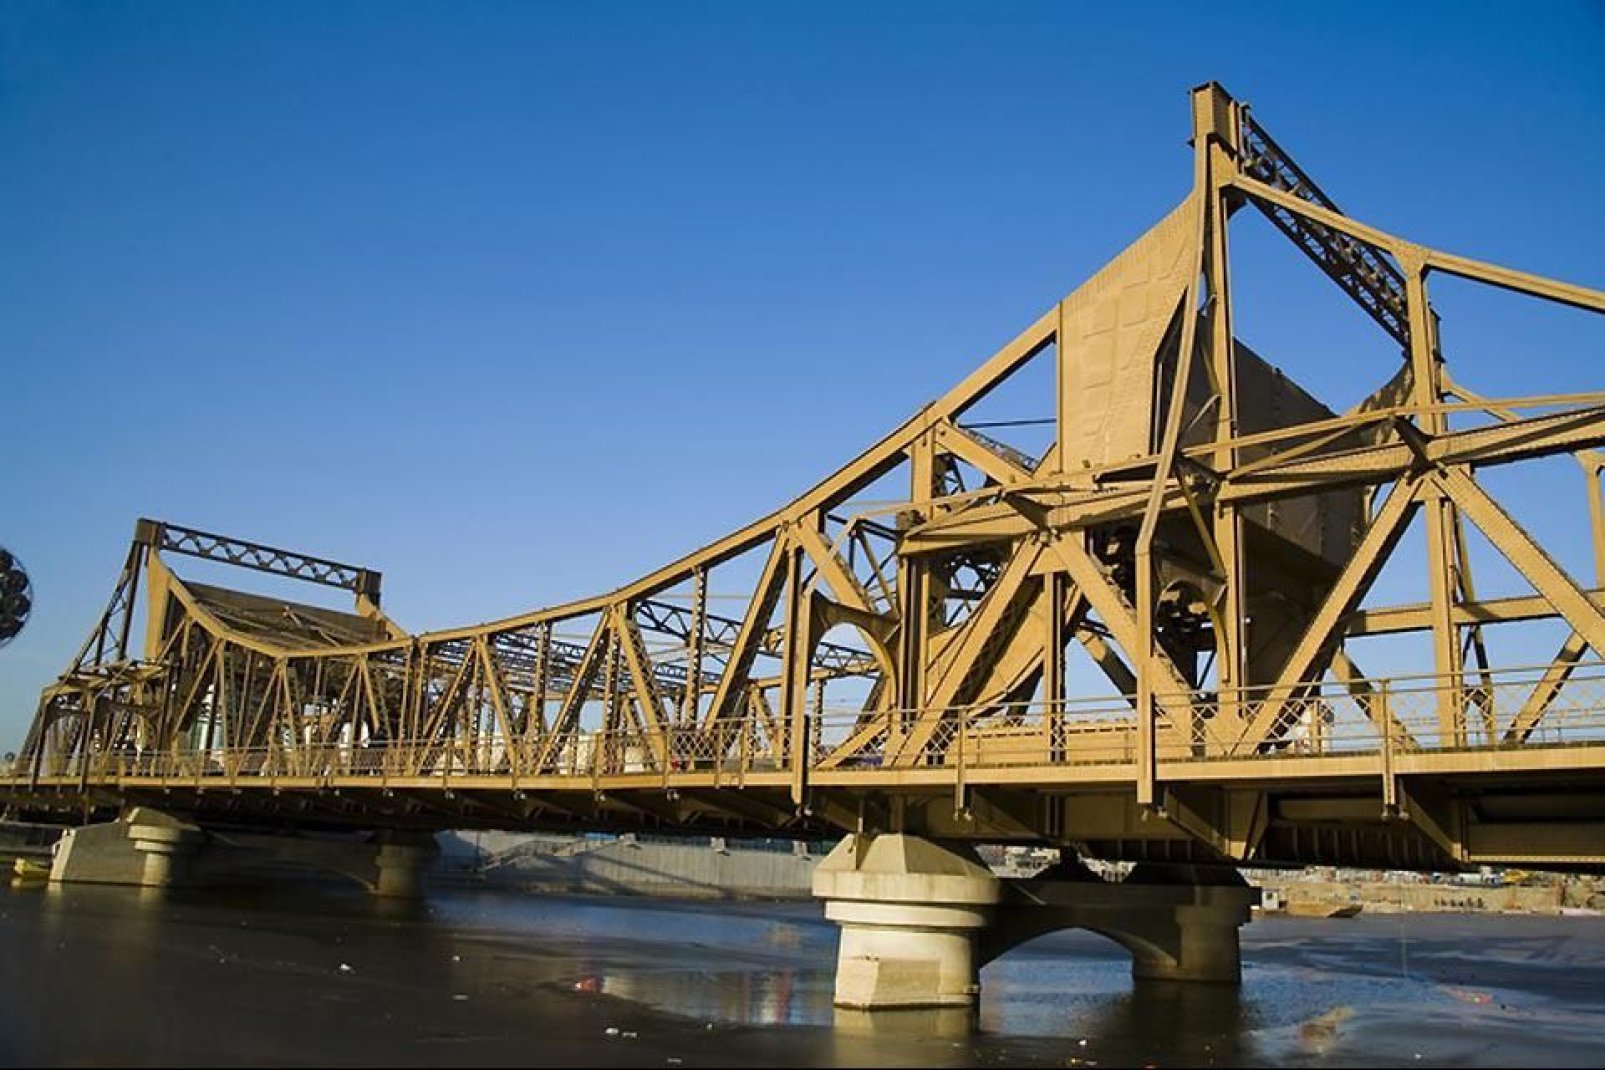 The largest drawbridge in Asia is located in Tianjin. It was inaugurated in 2009.